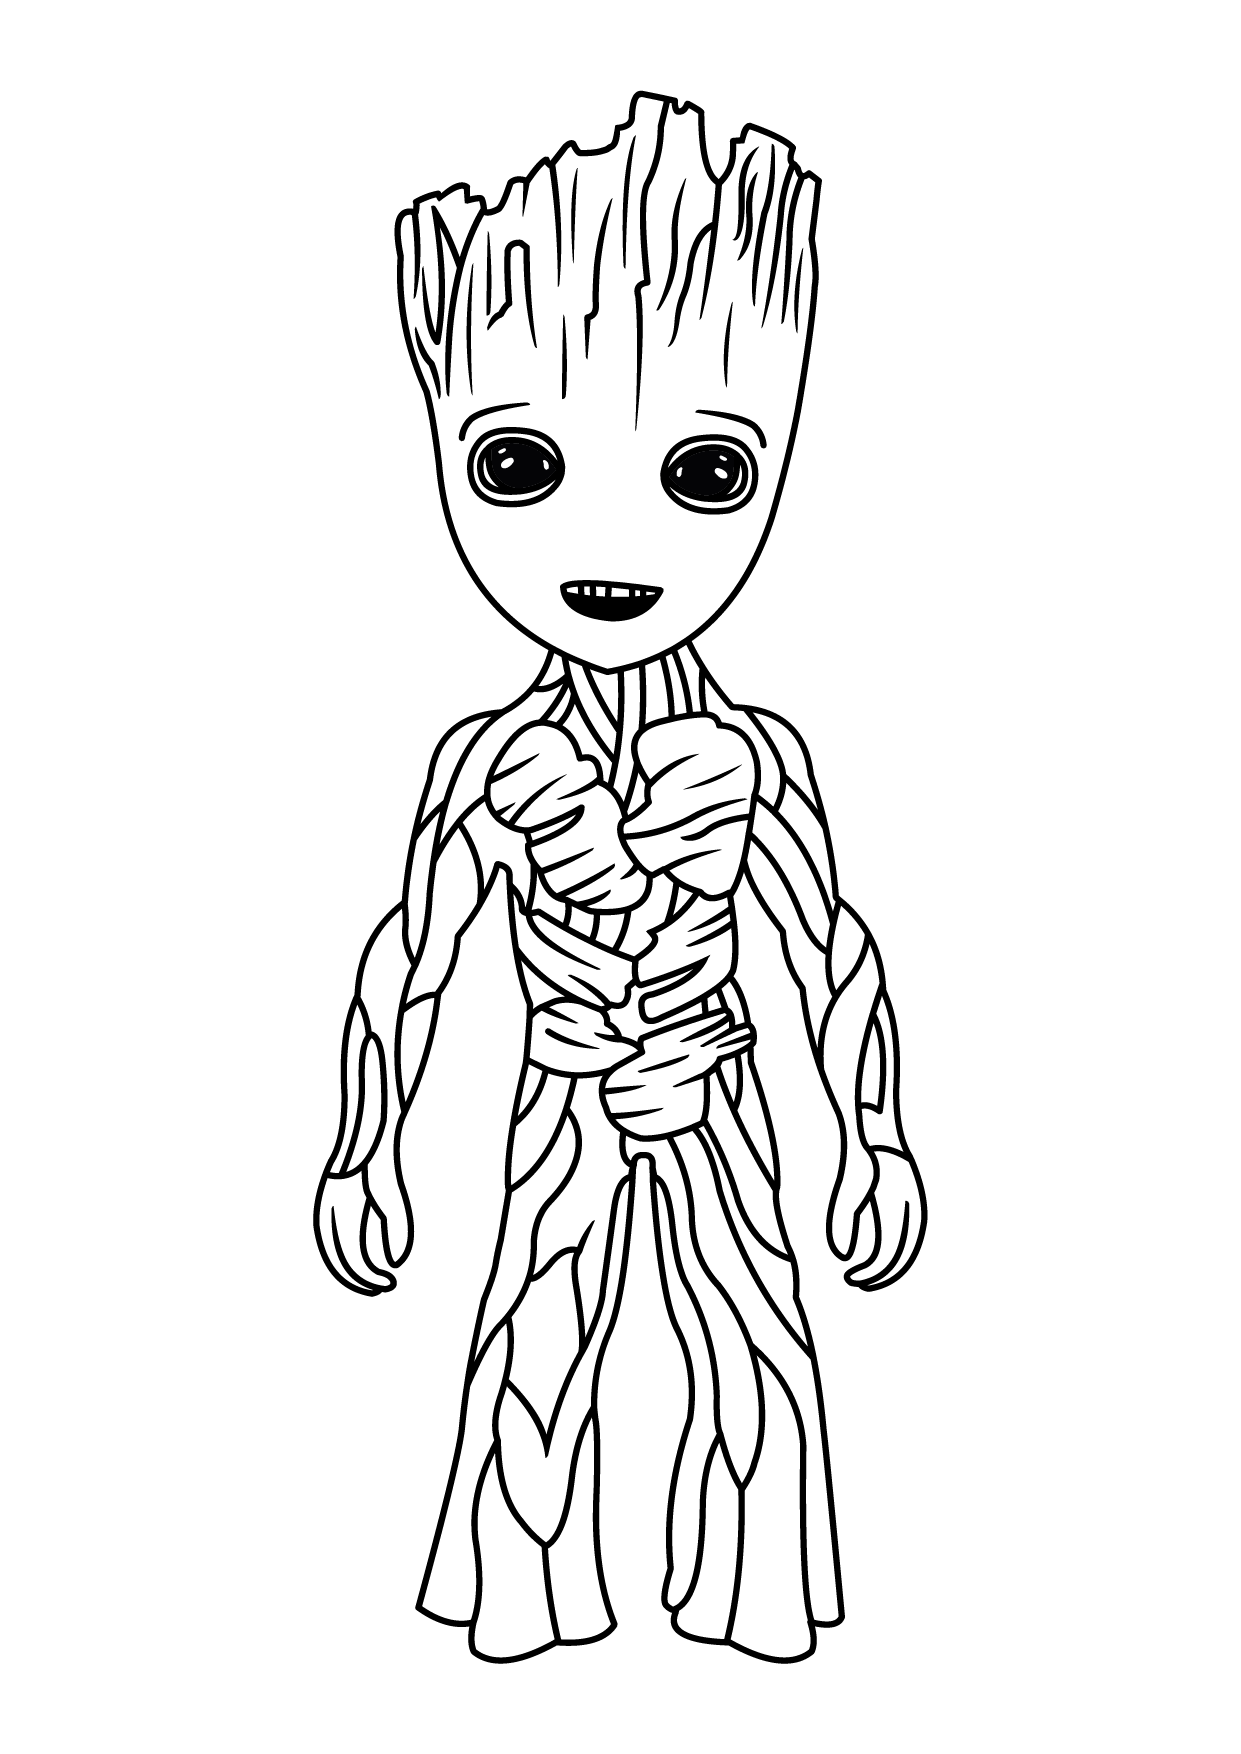 Baby Groot Coloring Page - Free Printable Coloring Pages for Kids